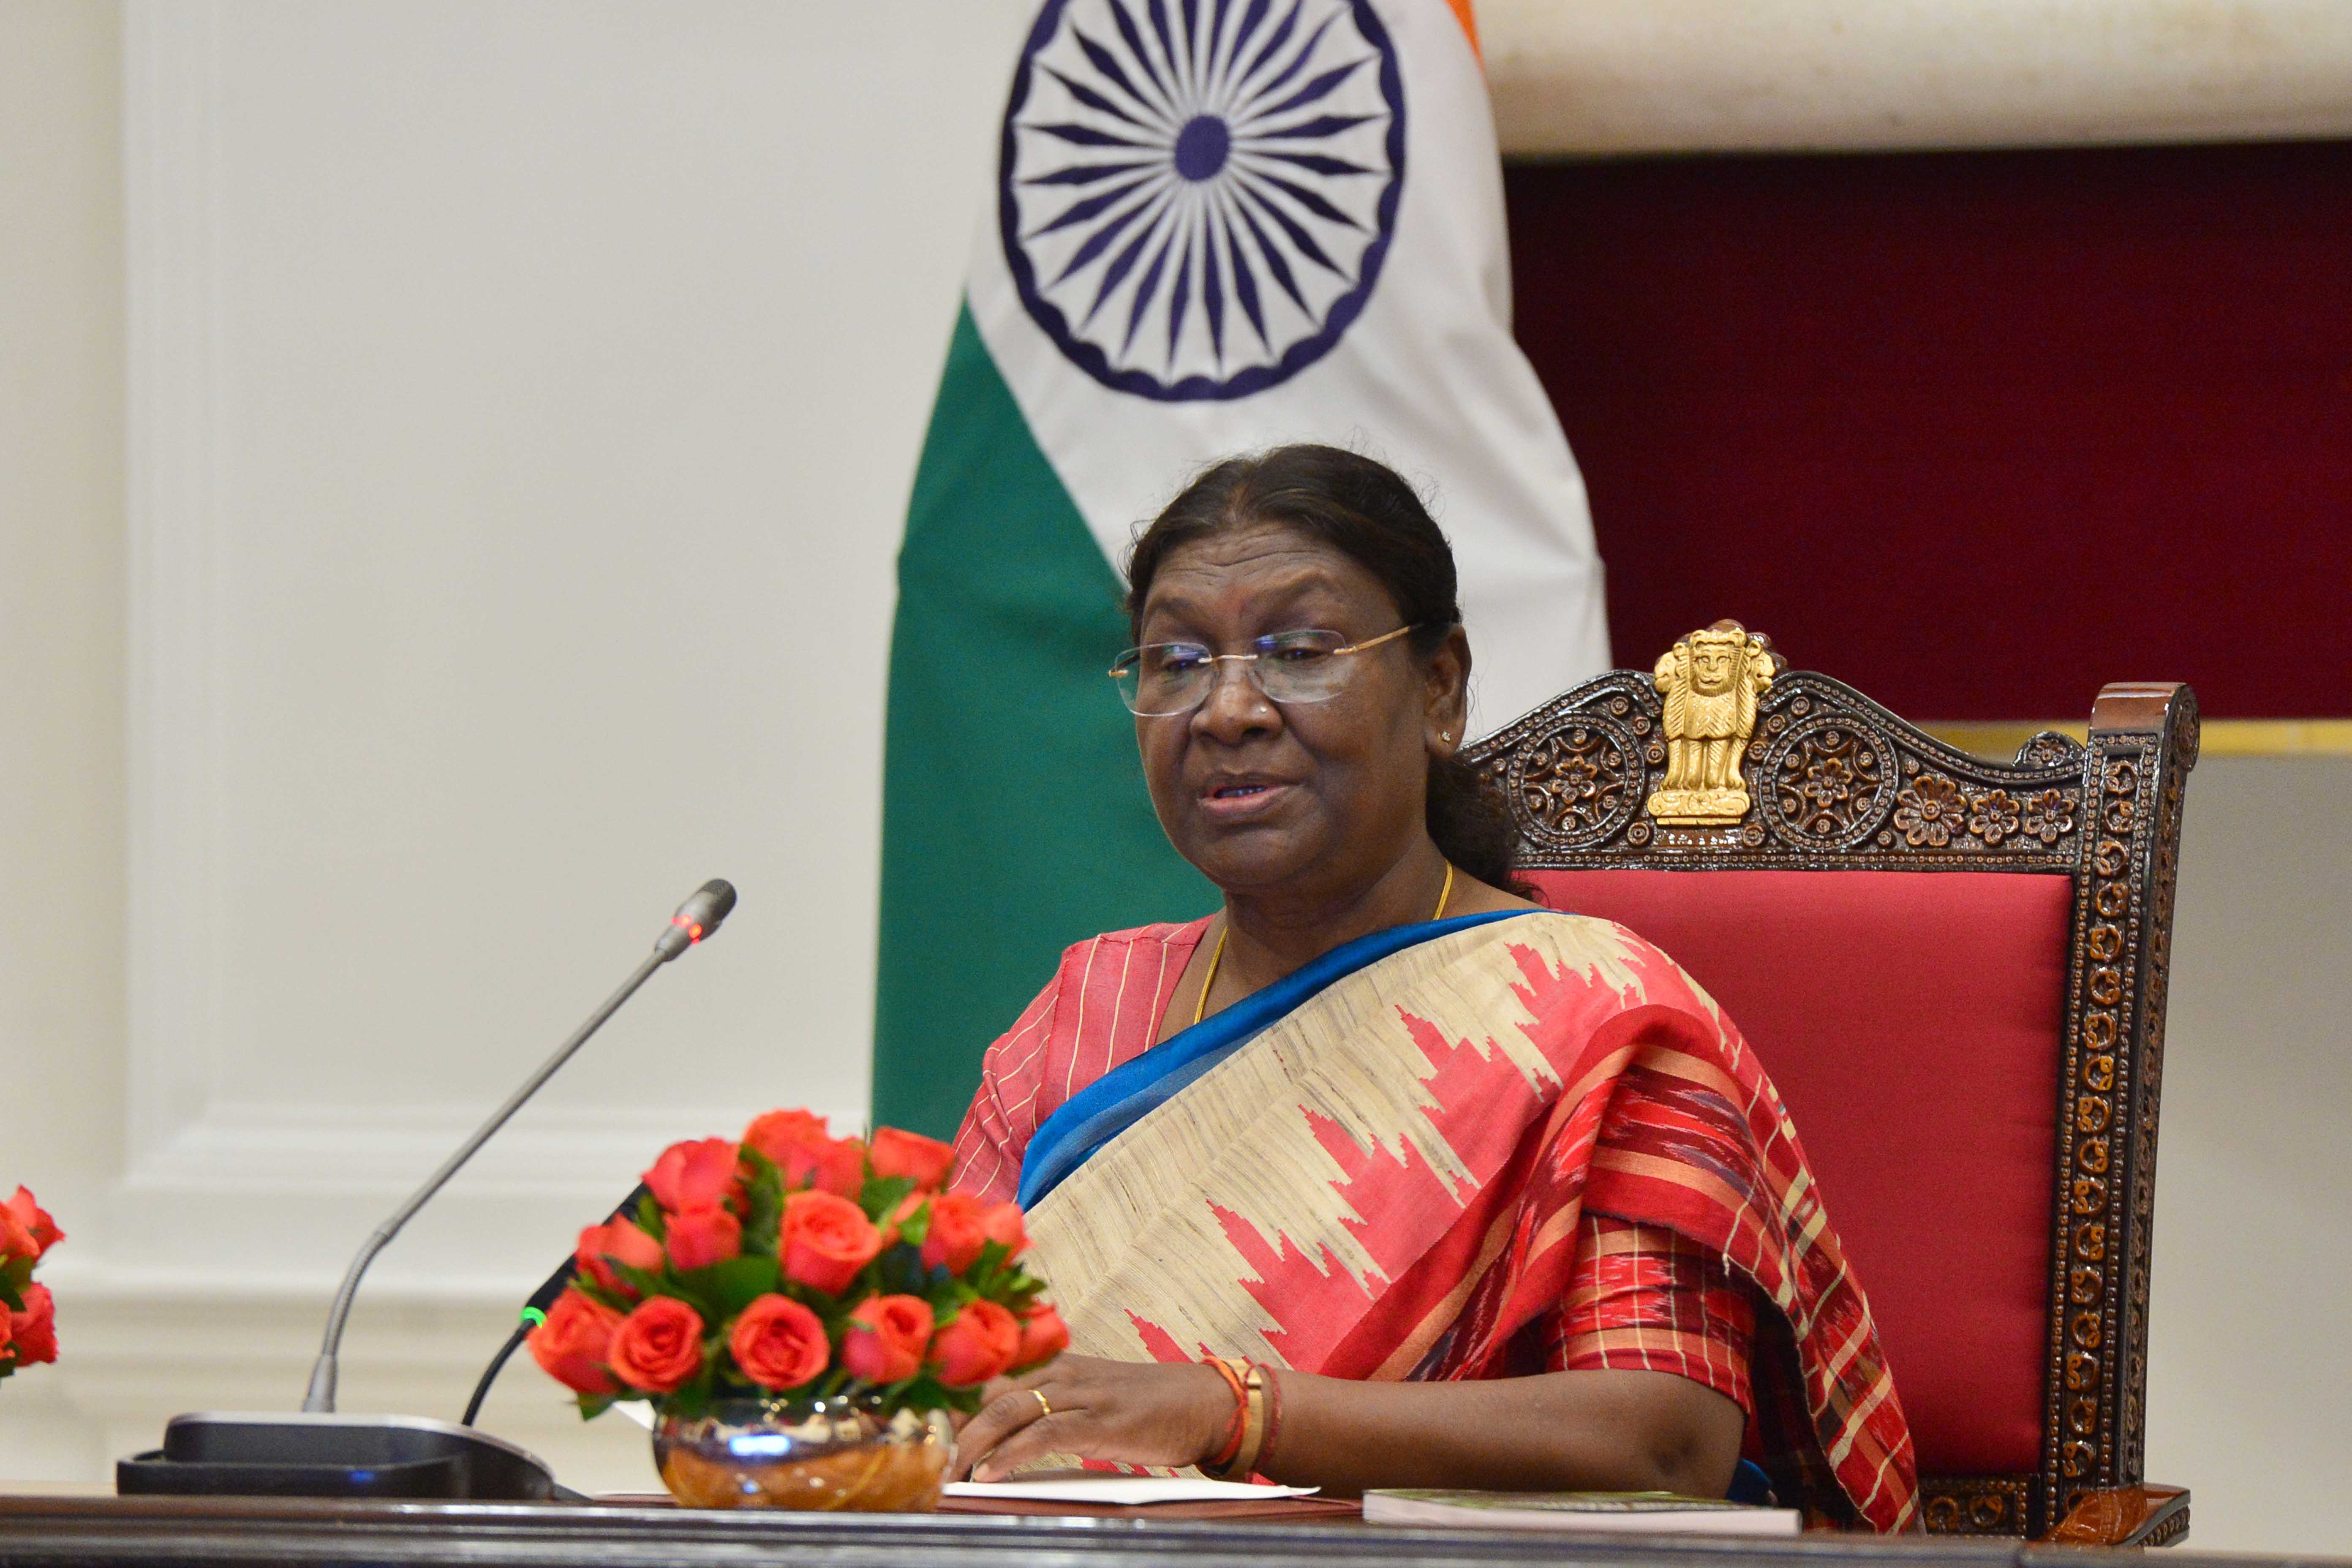 The President of India, Smt Droupadi Murmu completed one year in office on July 25, 2023.